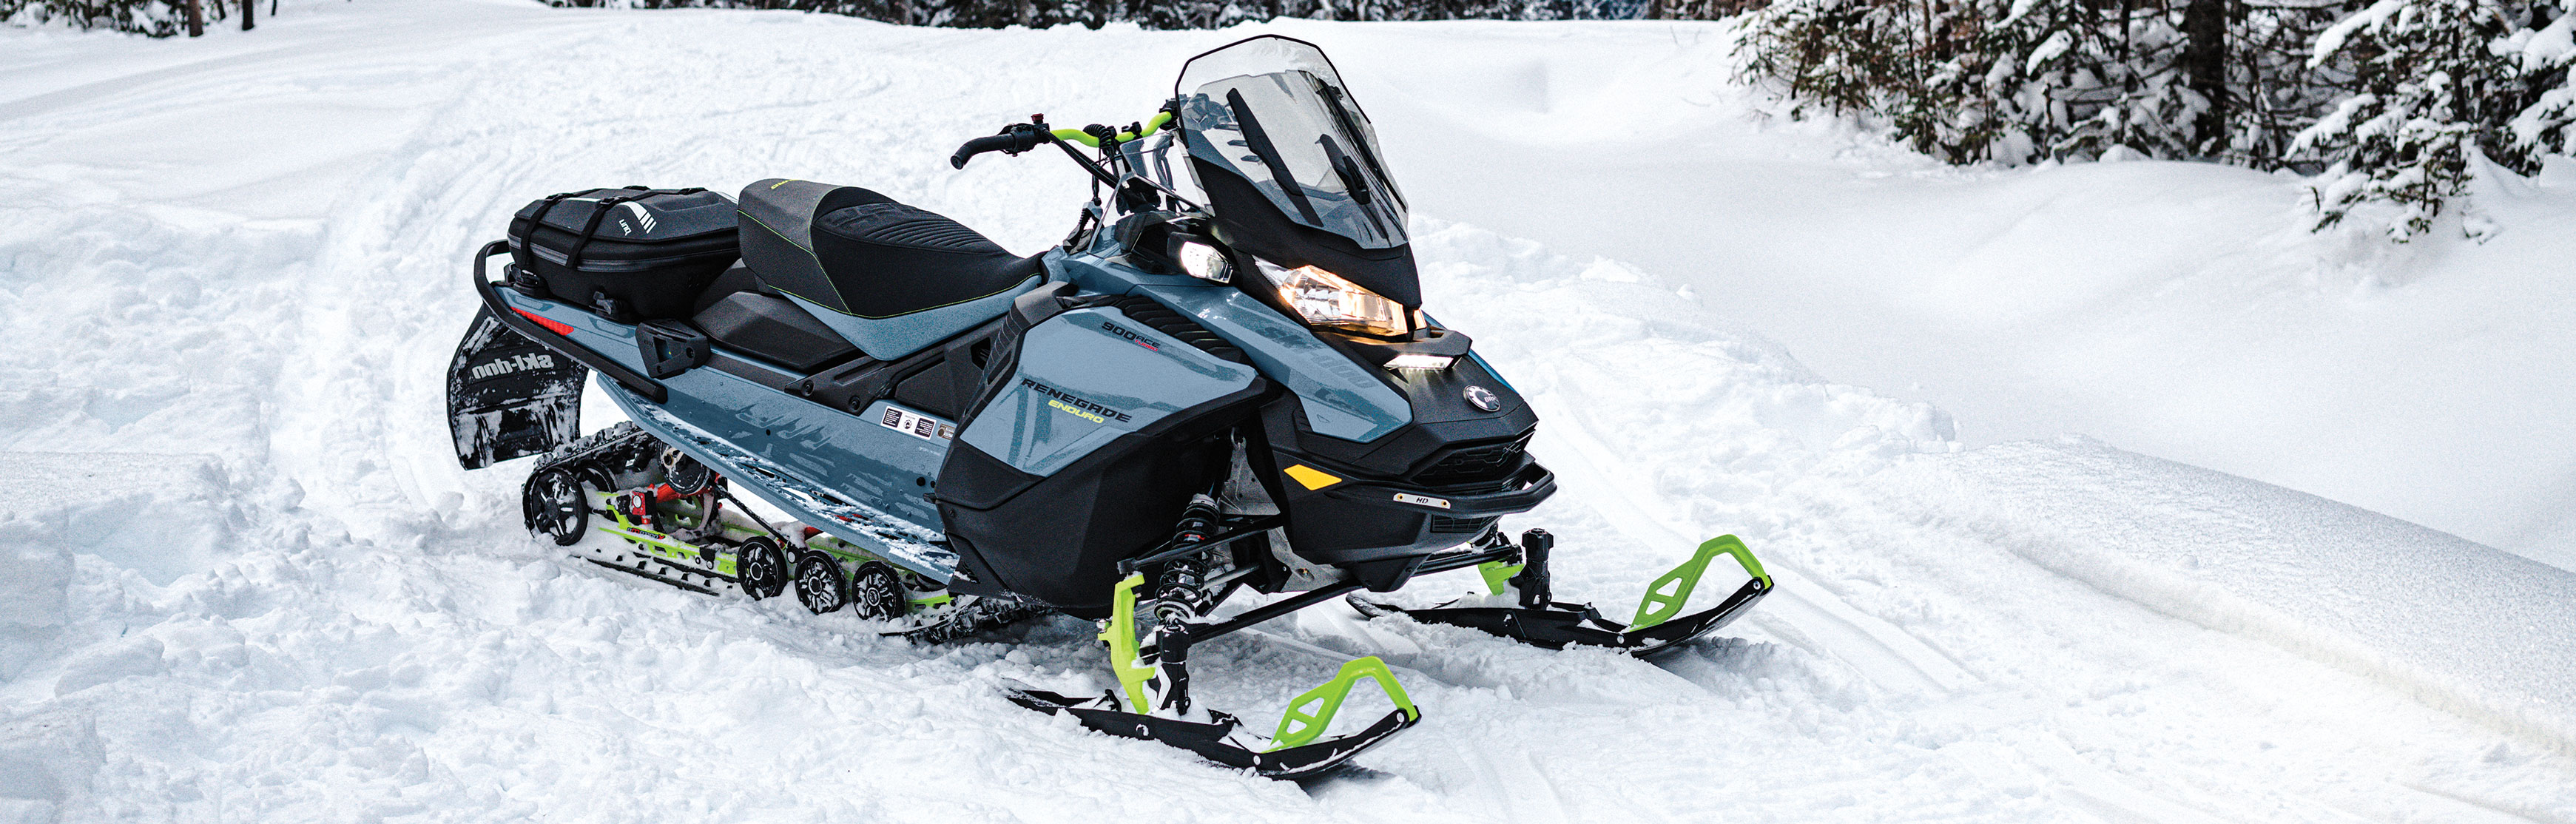 TOP 5 MUST-HAVE ACCESSORIES FOR TRAIL SNOWMOBILING